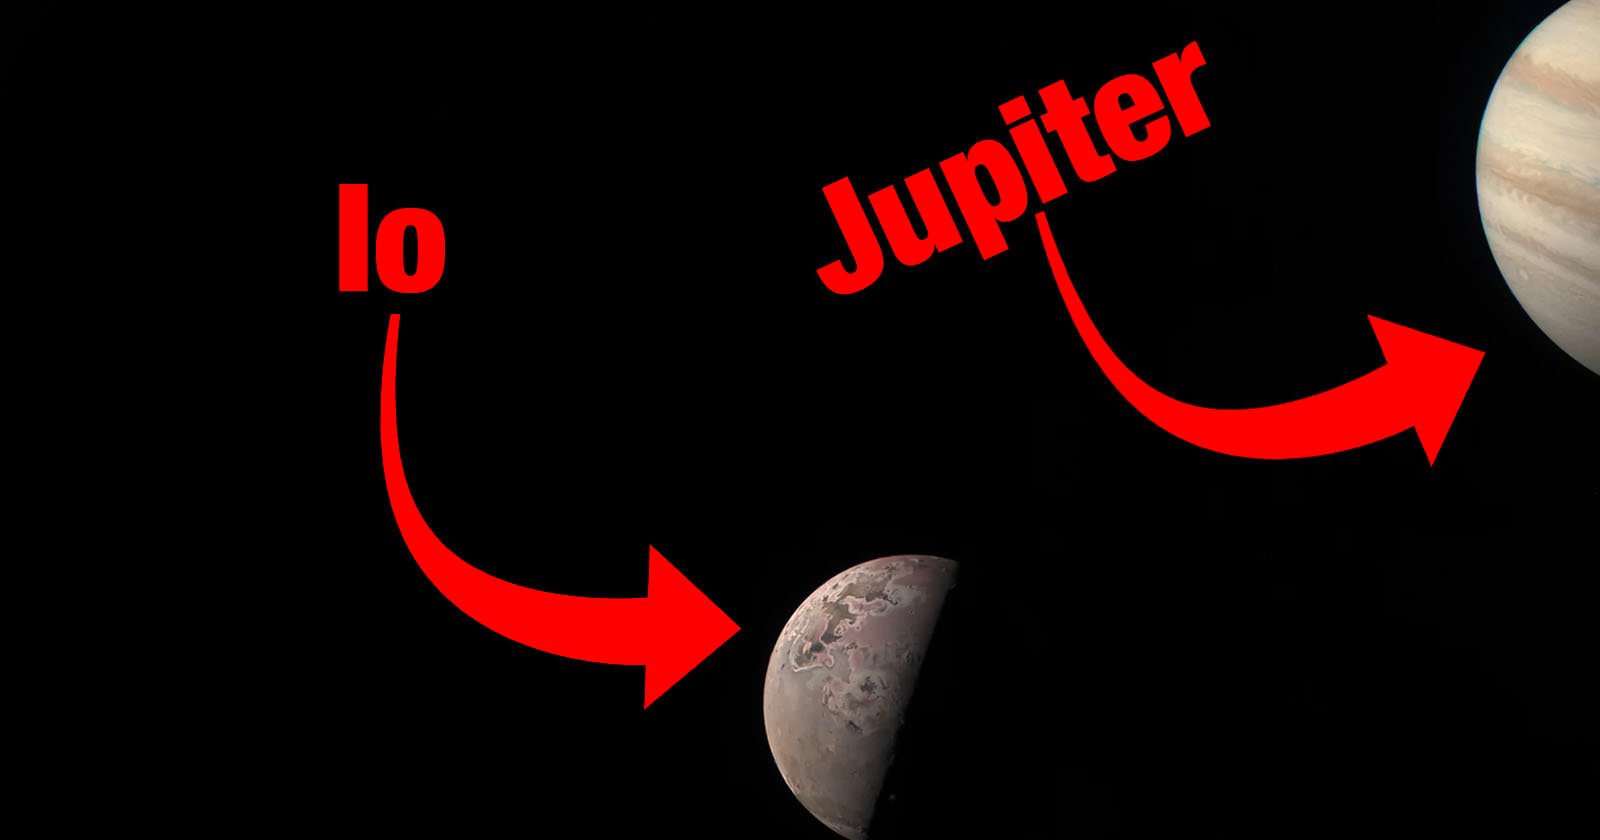 New Images of Jupiters Moon Io are the Best Ever